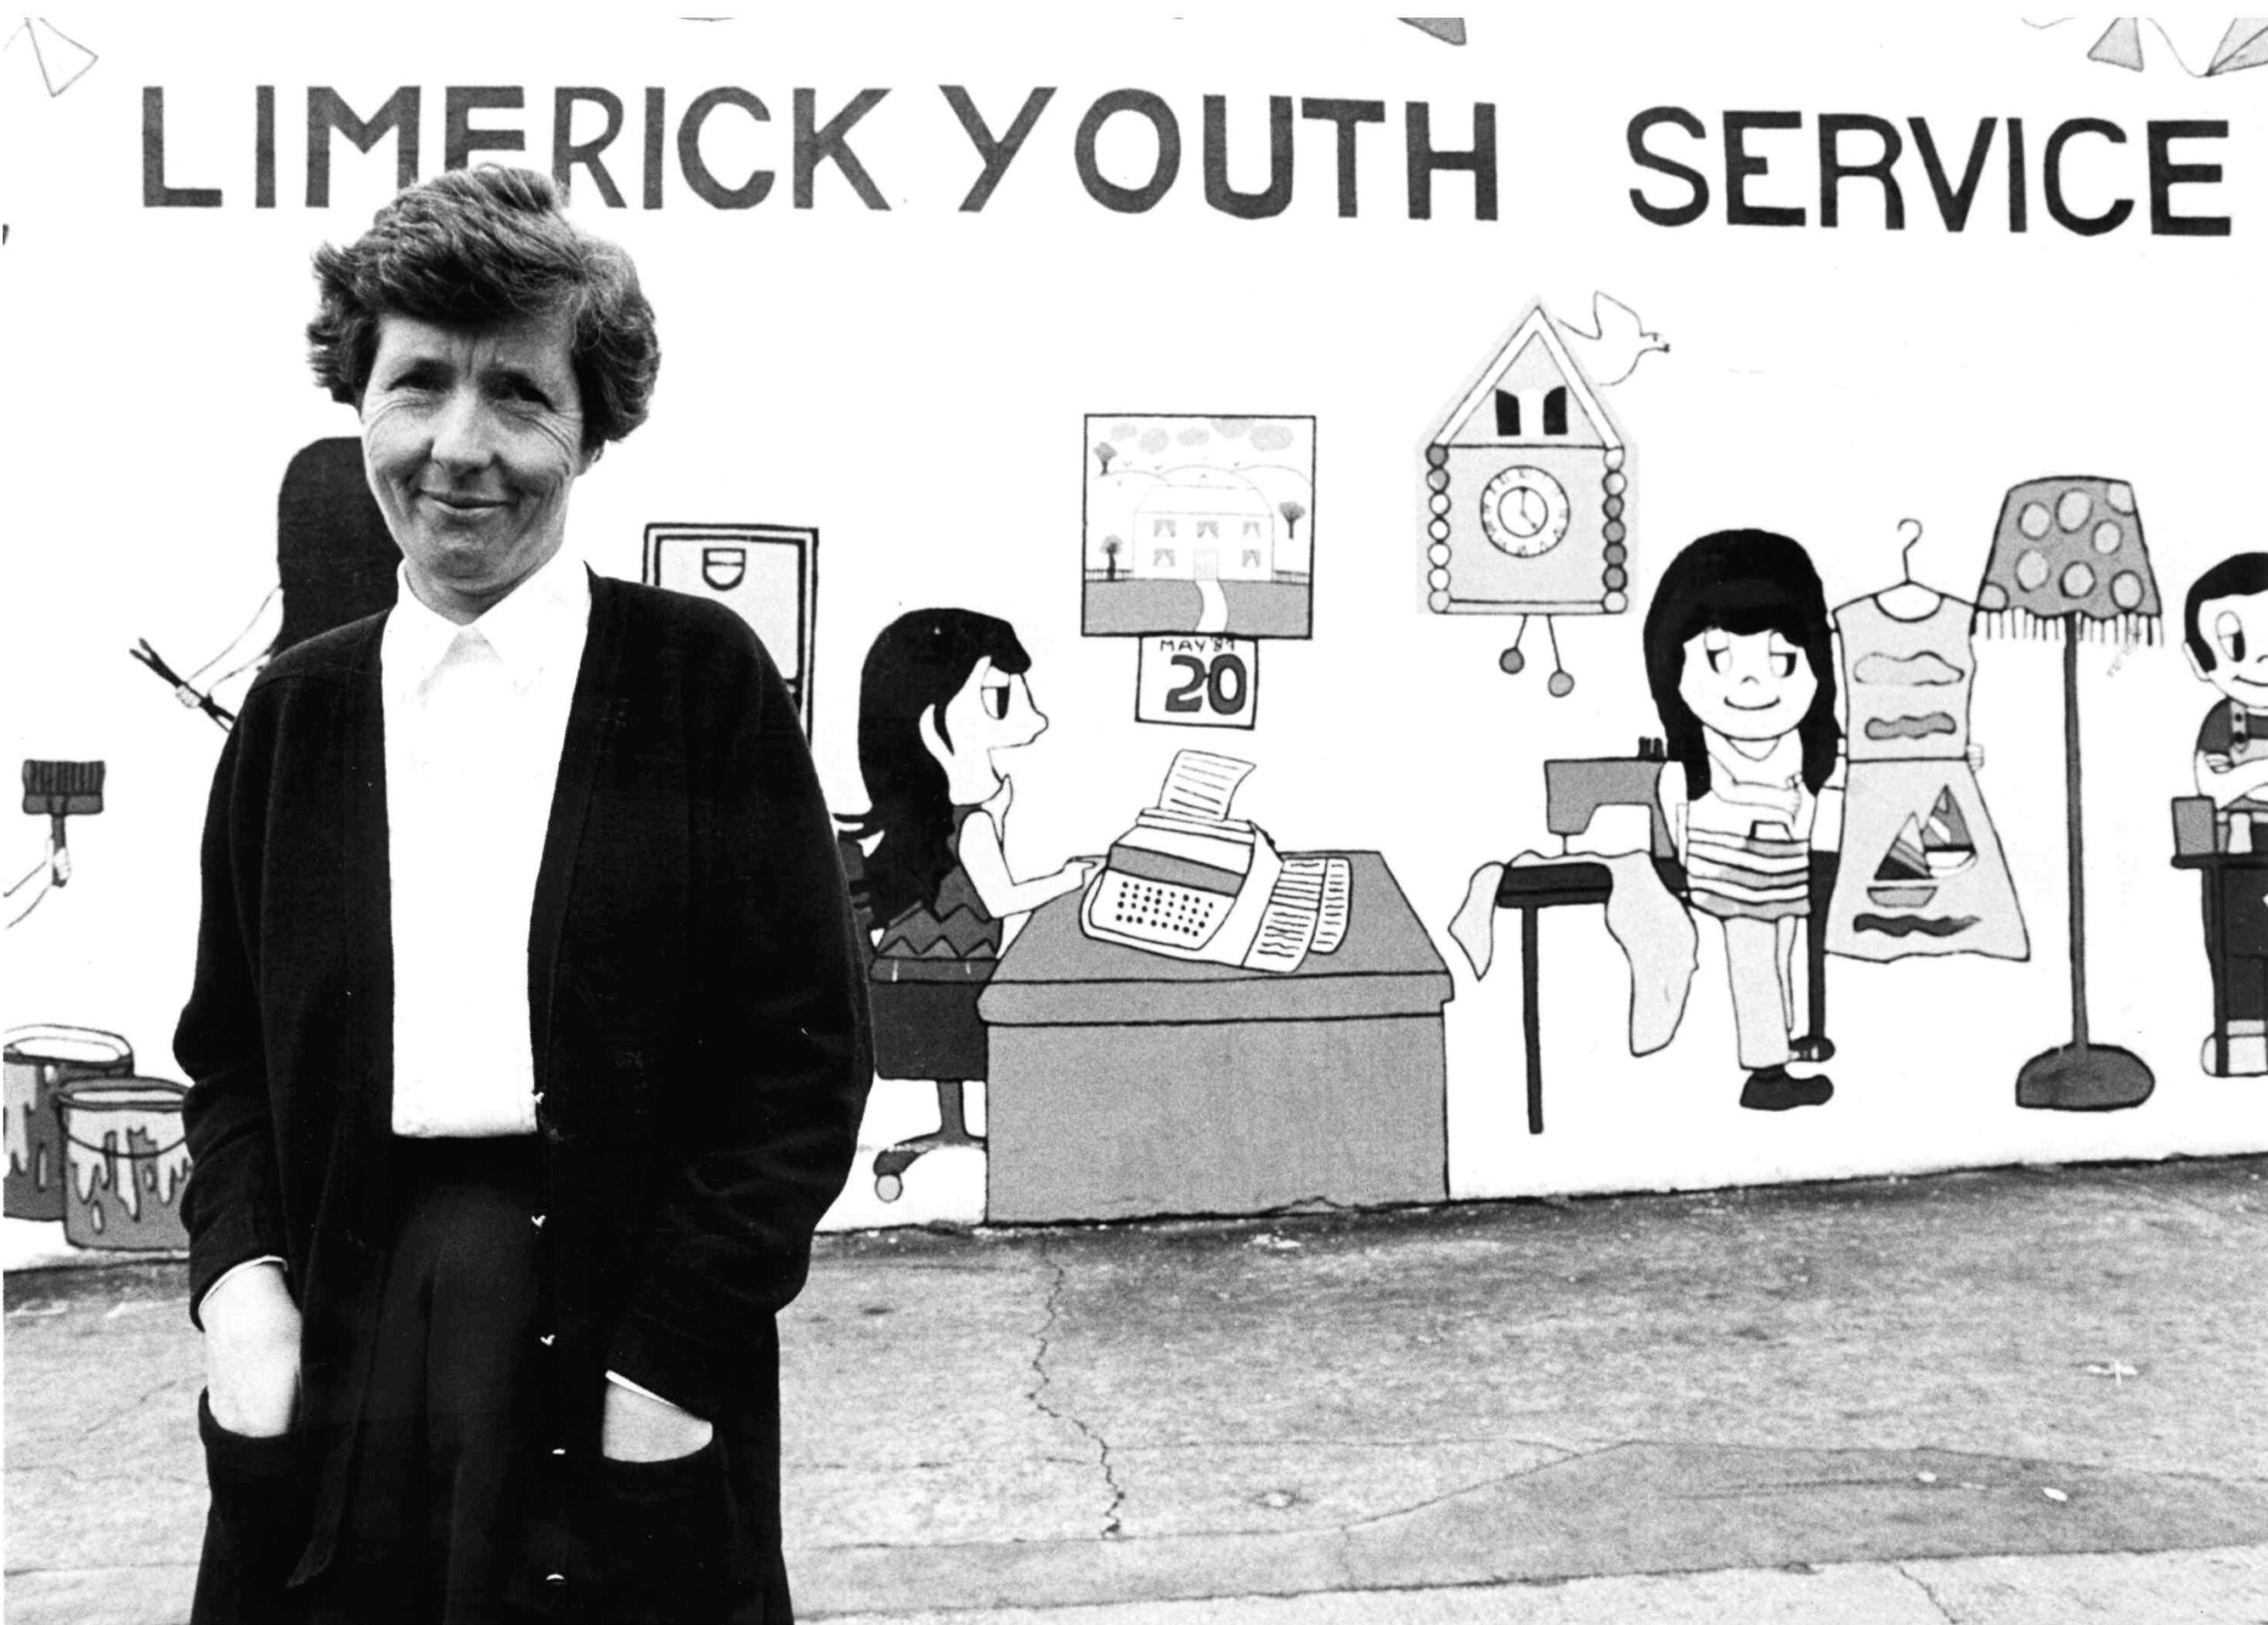 Limerick Youth Service exhibition will feature a selection of photos from the 50 years of LYS